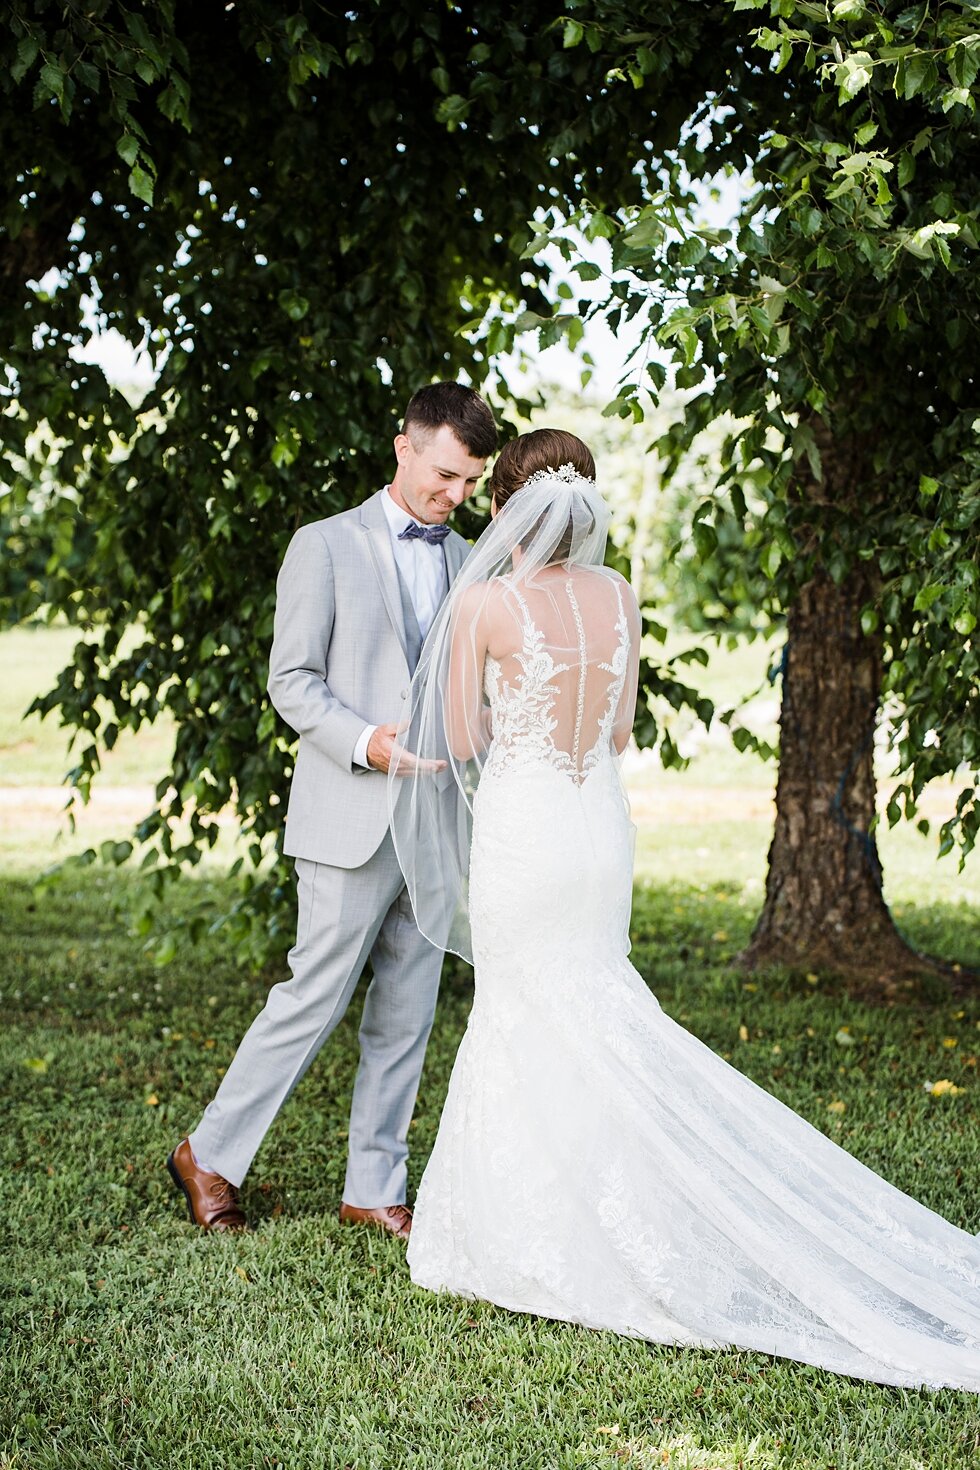  Beautiful outdoor first look for bride and groom at hubers winery before they get married to each other. special wedding details stunning gorgeous tears emotional #thatsdarling #weddingday #weddinginspiration #weddingphoto #love #justmarried #midwes